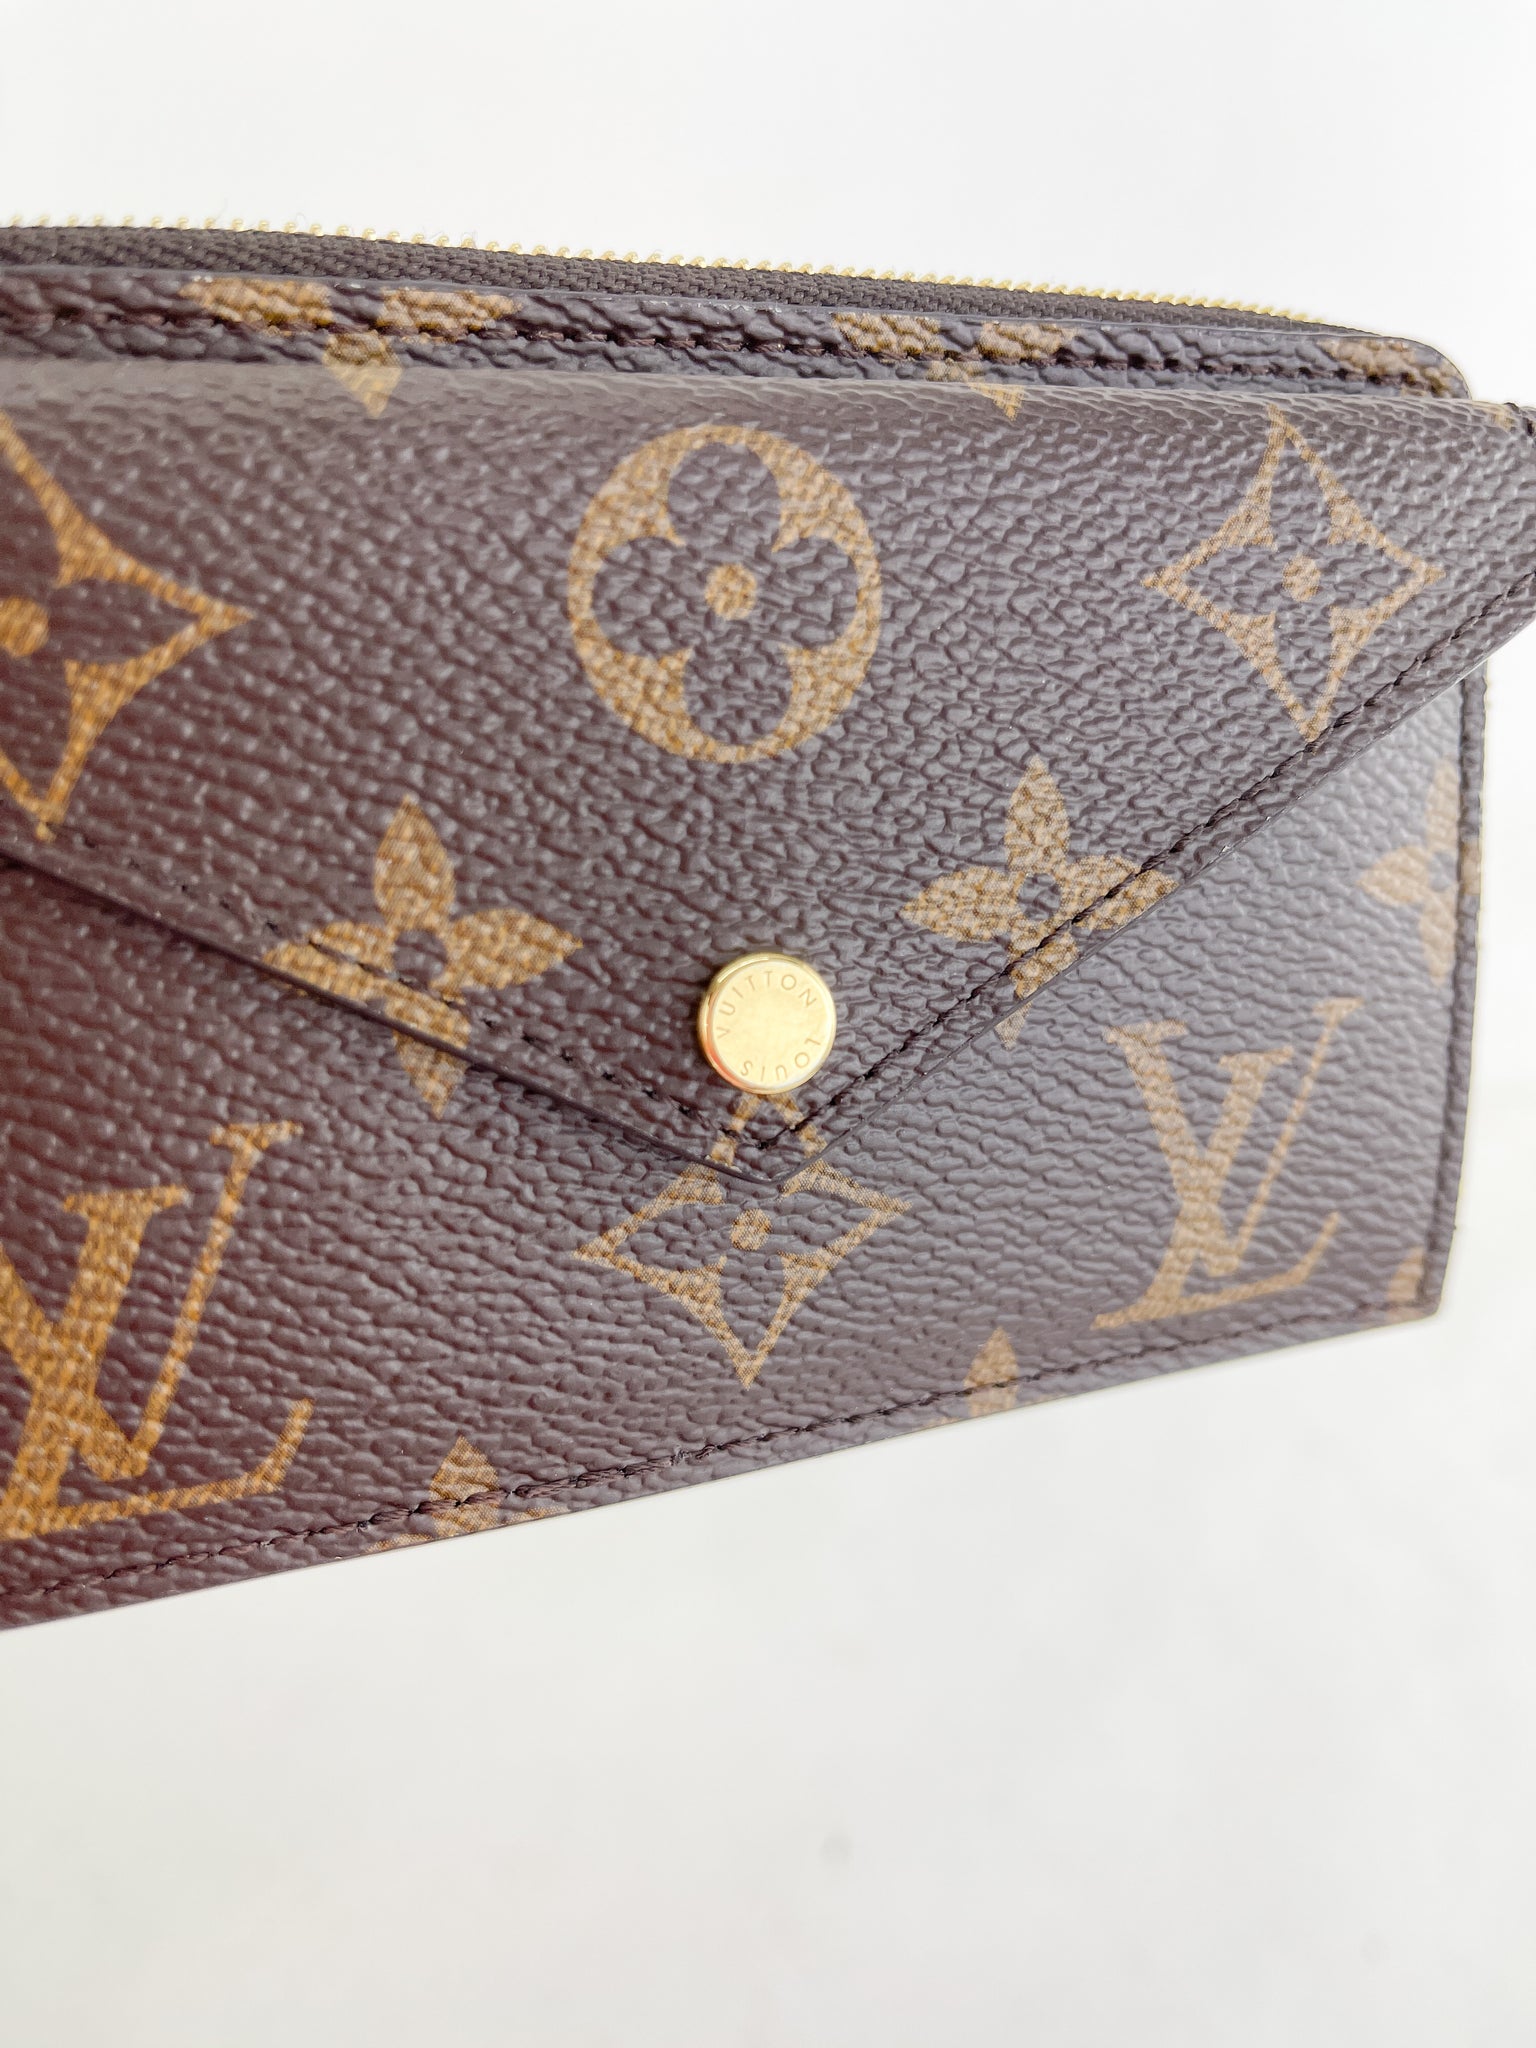 LOUIS VUITTON RECTO VERSO VS. KEY POUCH - WHICH ONE IS BETTER? 